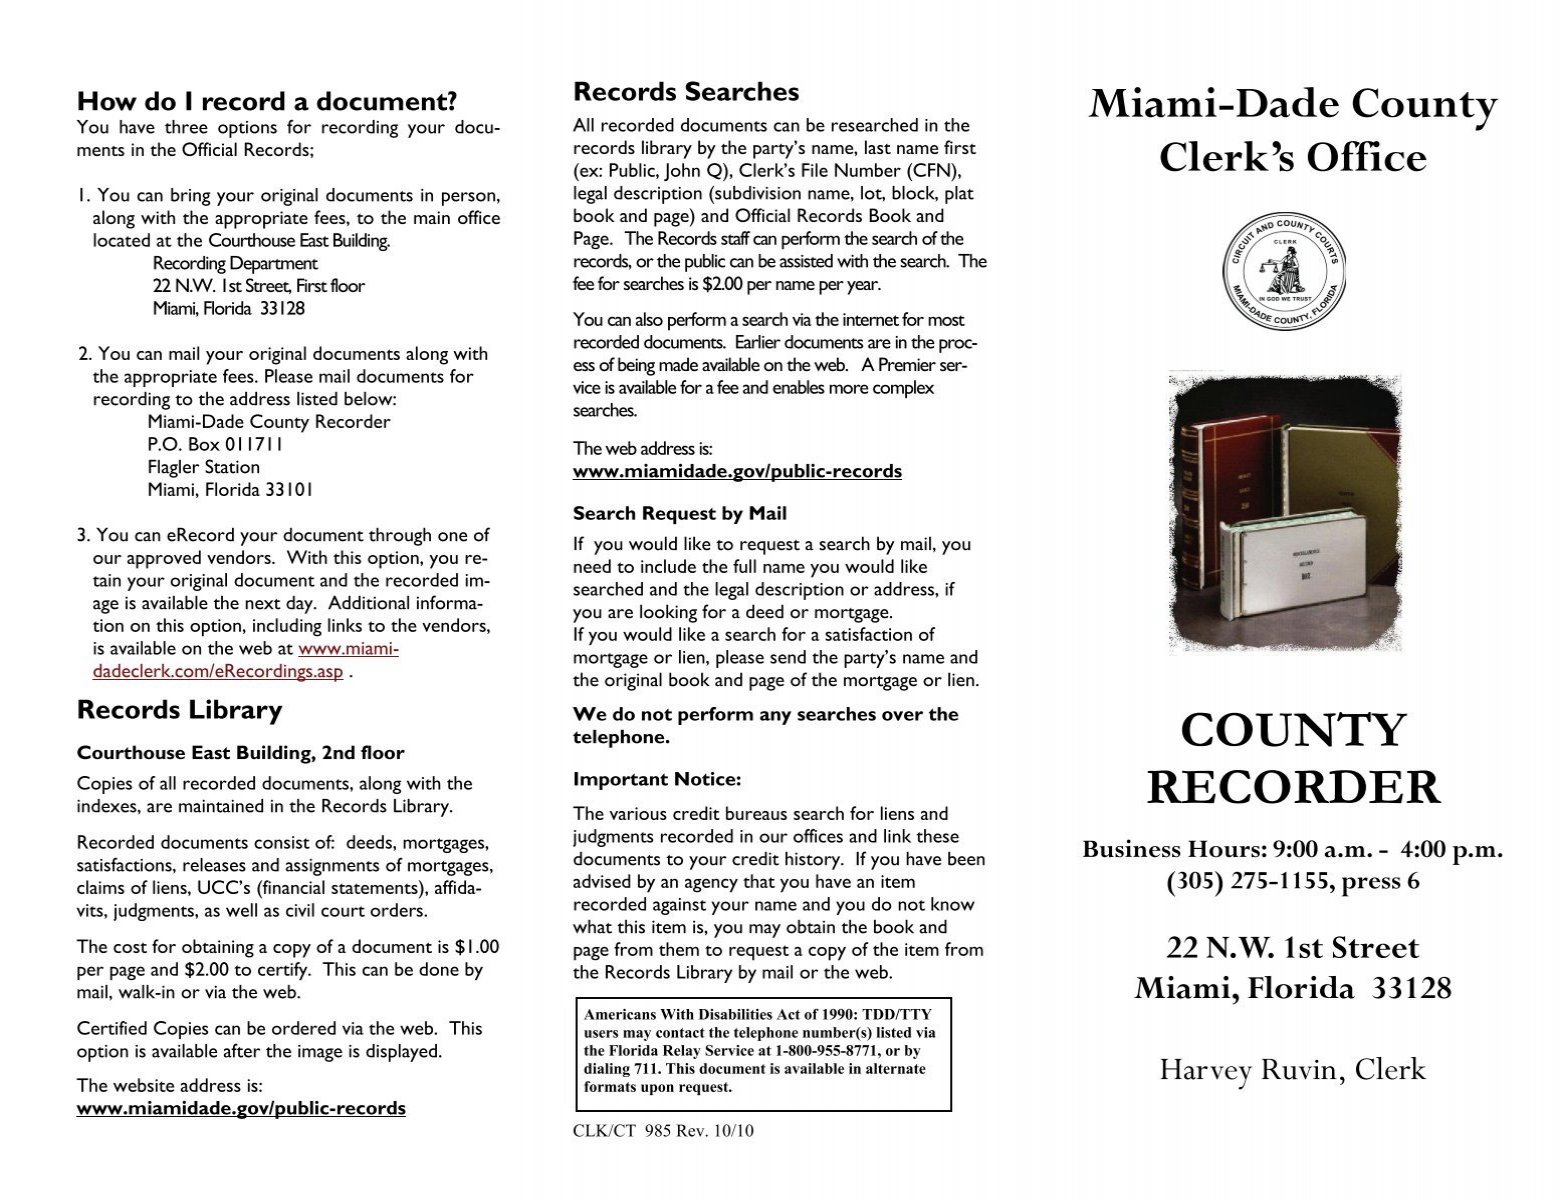 County Recorder Brochure Miami Dade County Clerk of Courts